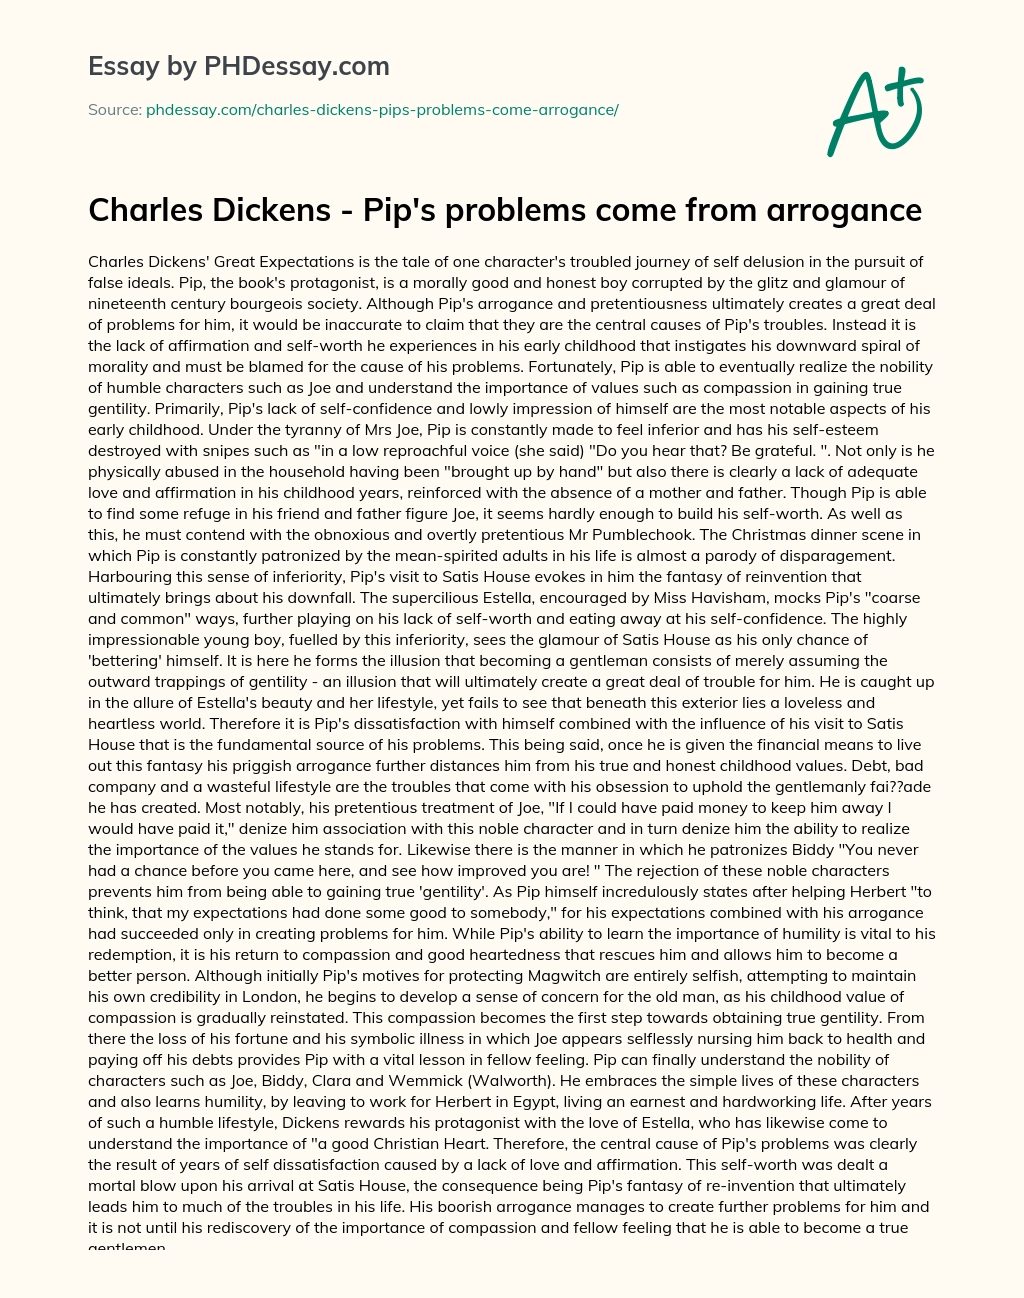 Charles Dickens – Pip’s problems come from arrogance essay